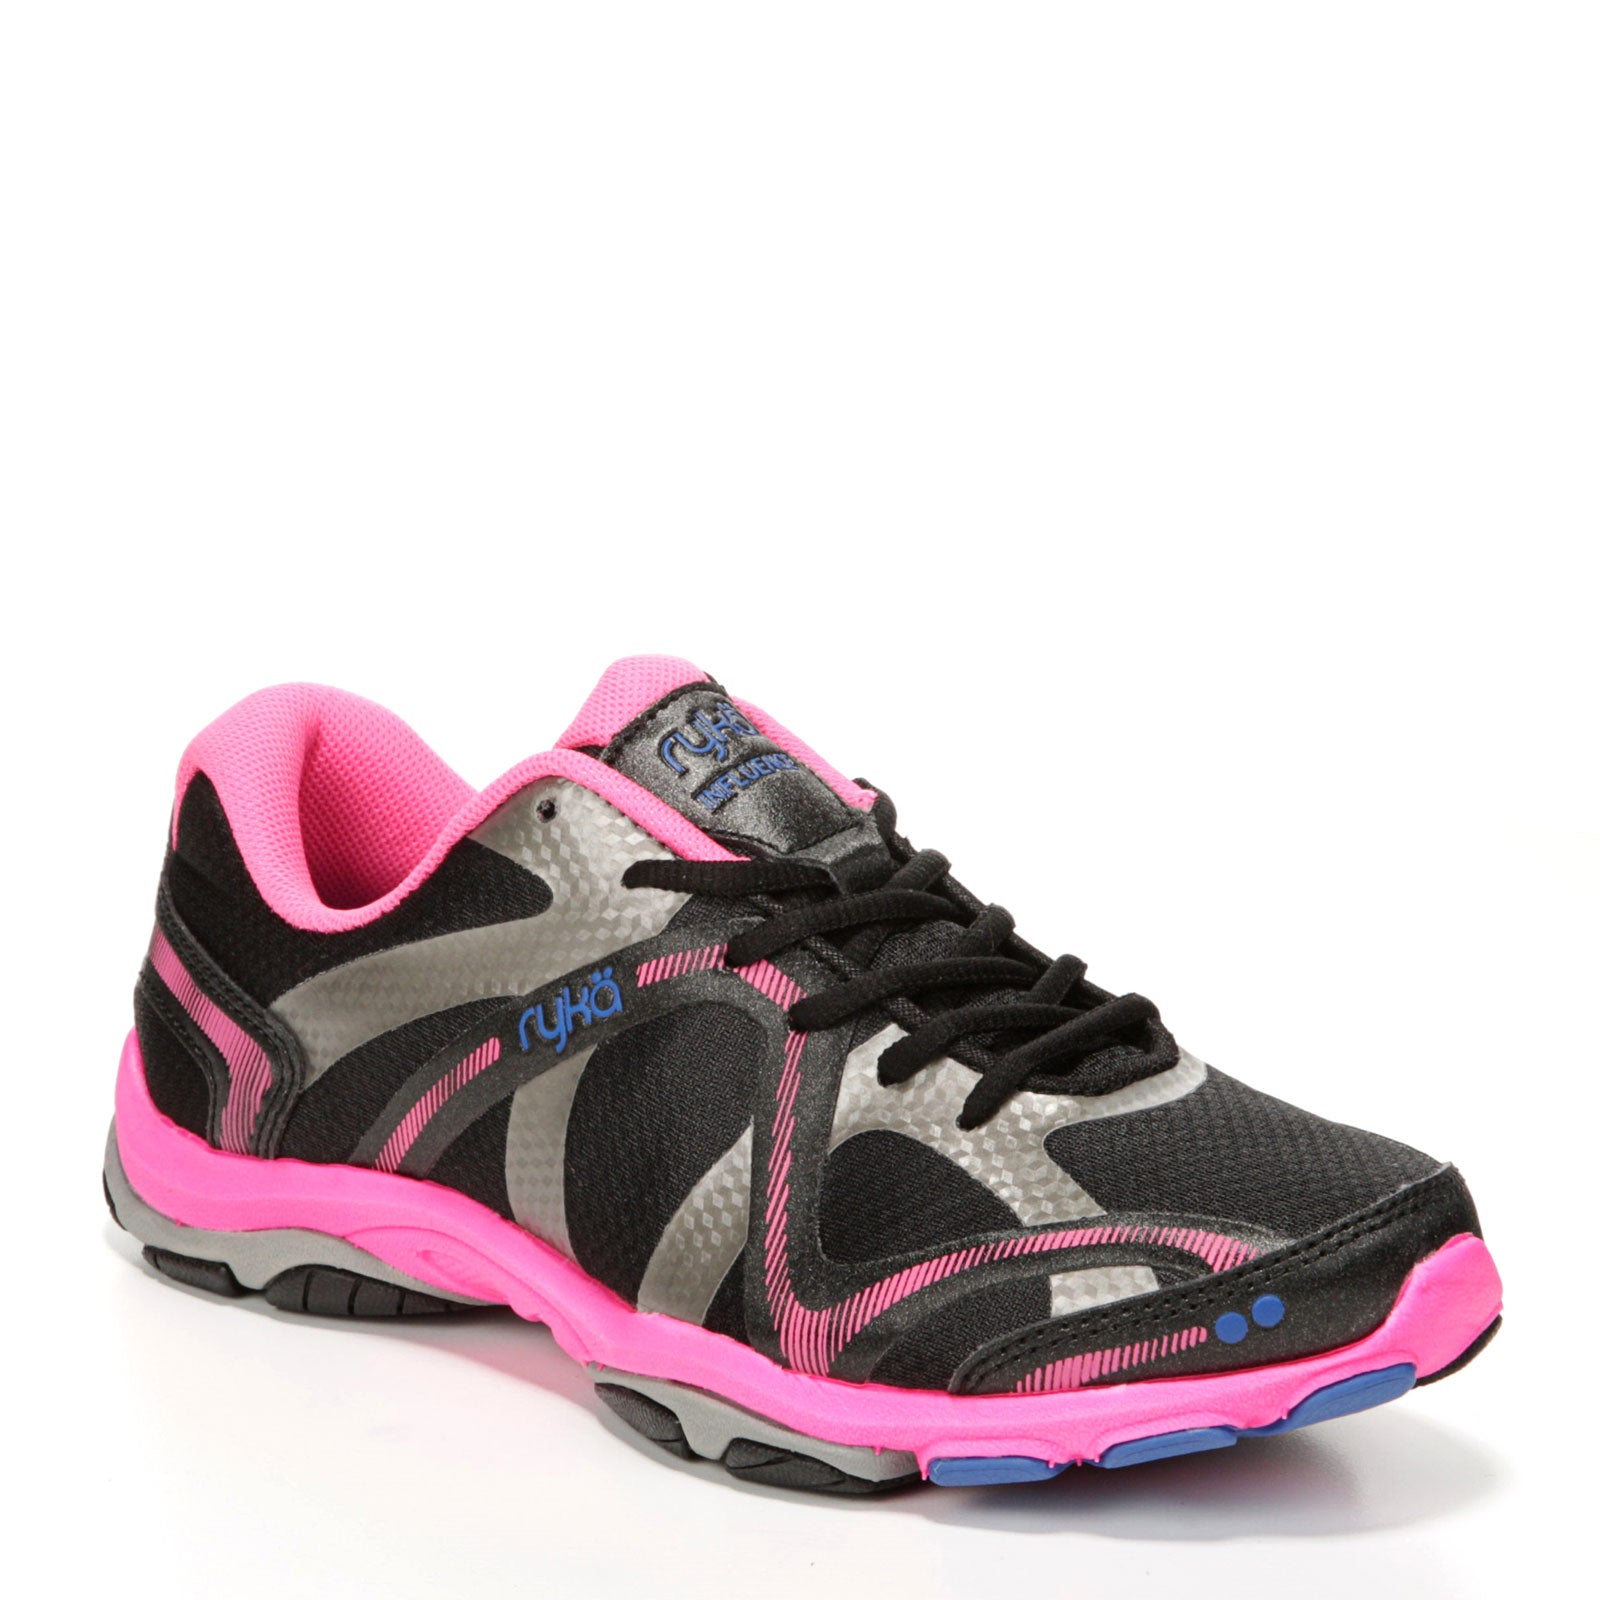 Women's Ryka Never Quit Training Shoes in Pink/Pink Size 9